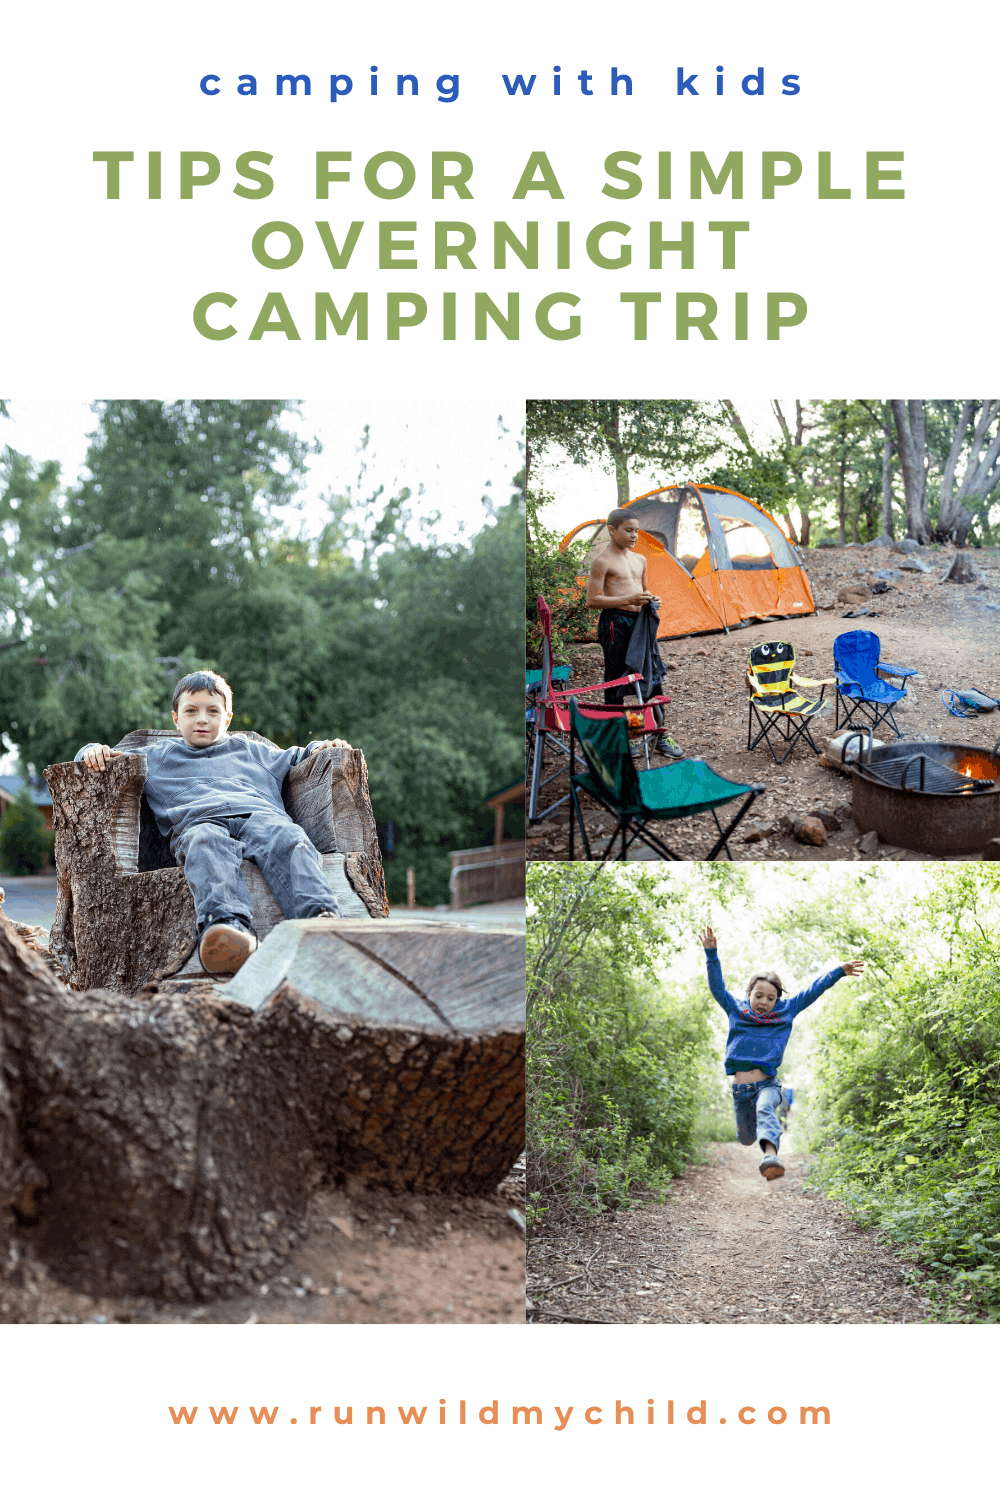 Tips for making an overnight camping trip with kids easy and simple